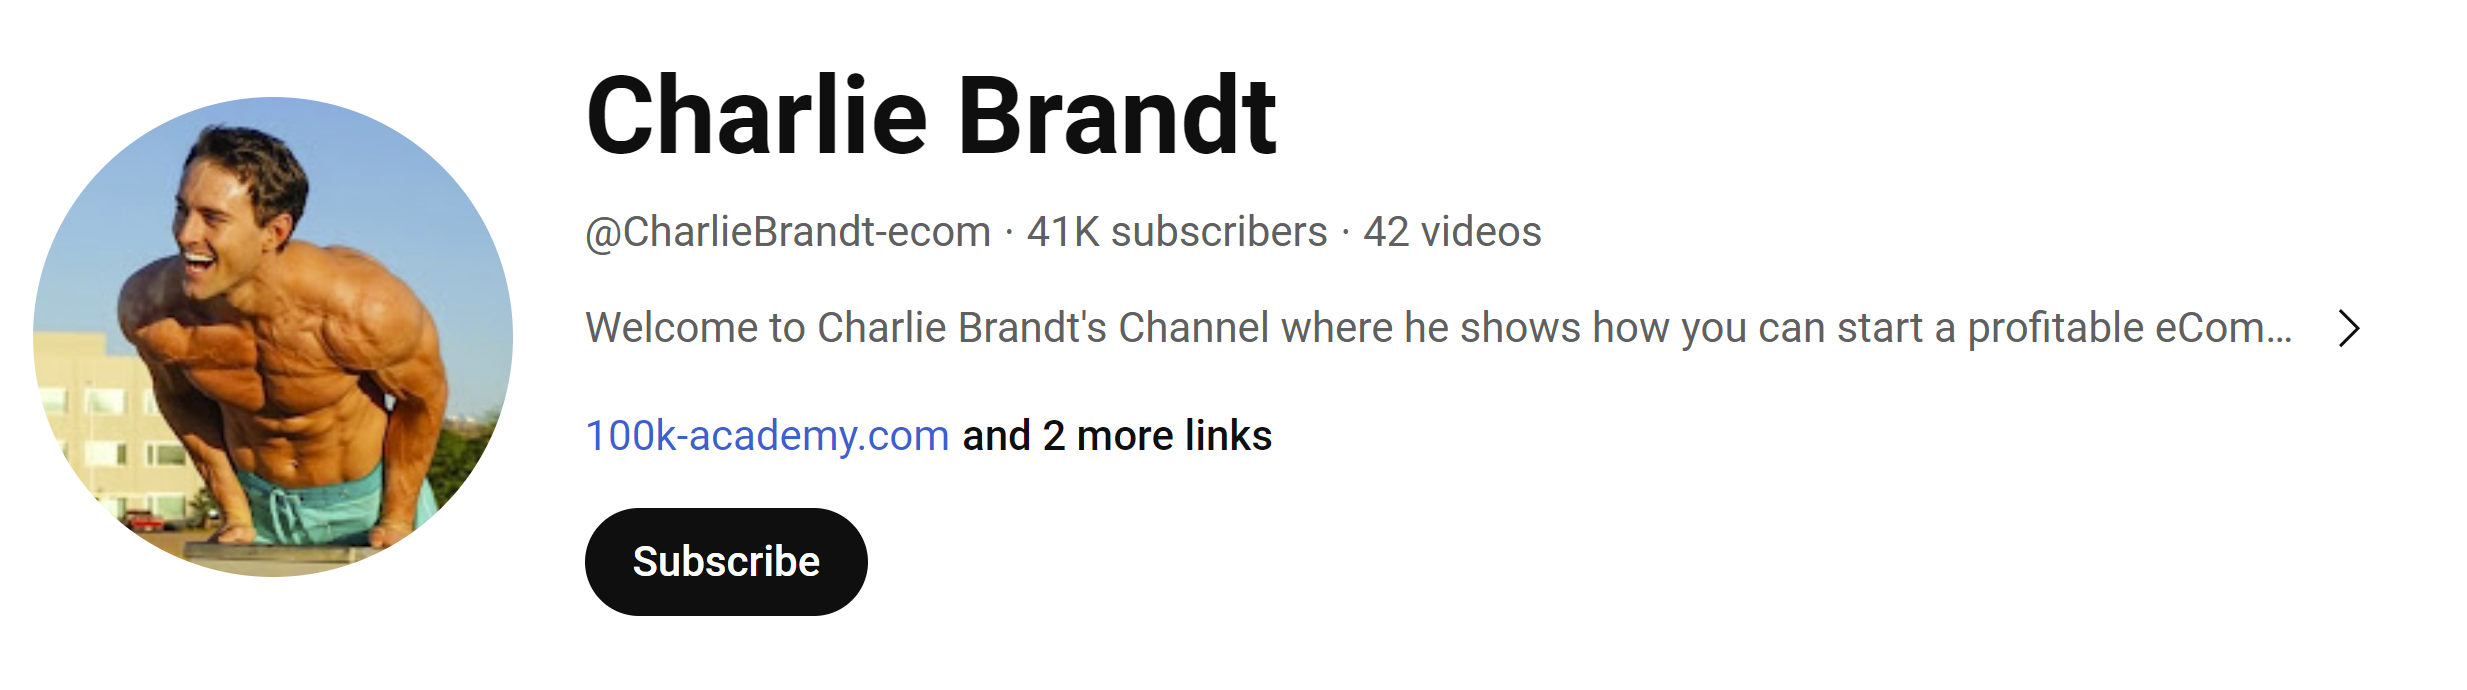 Who Is Charlie Brandt